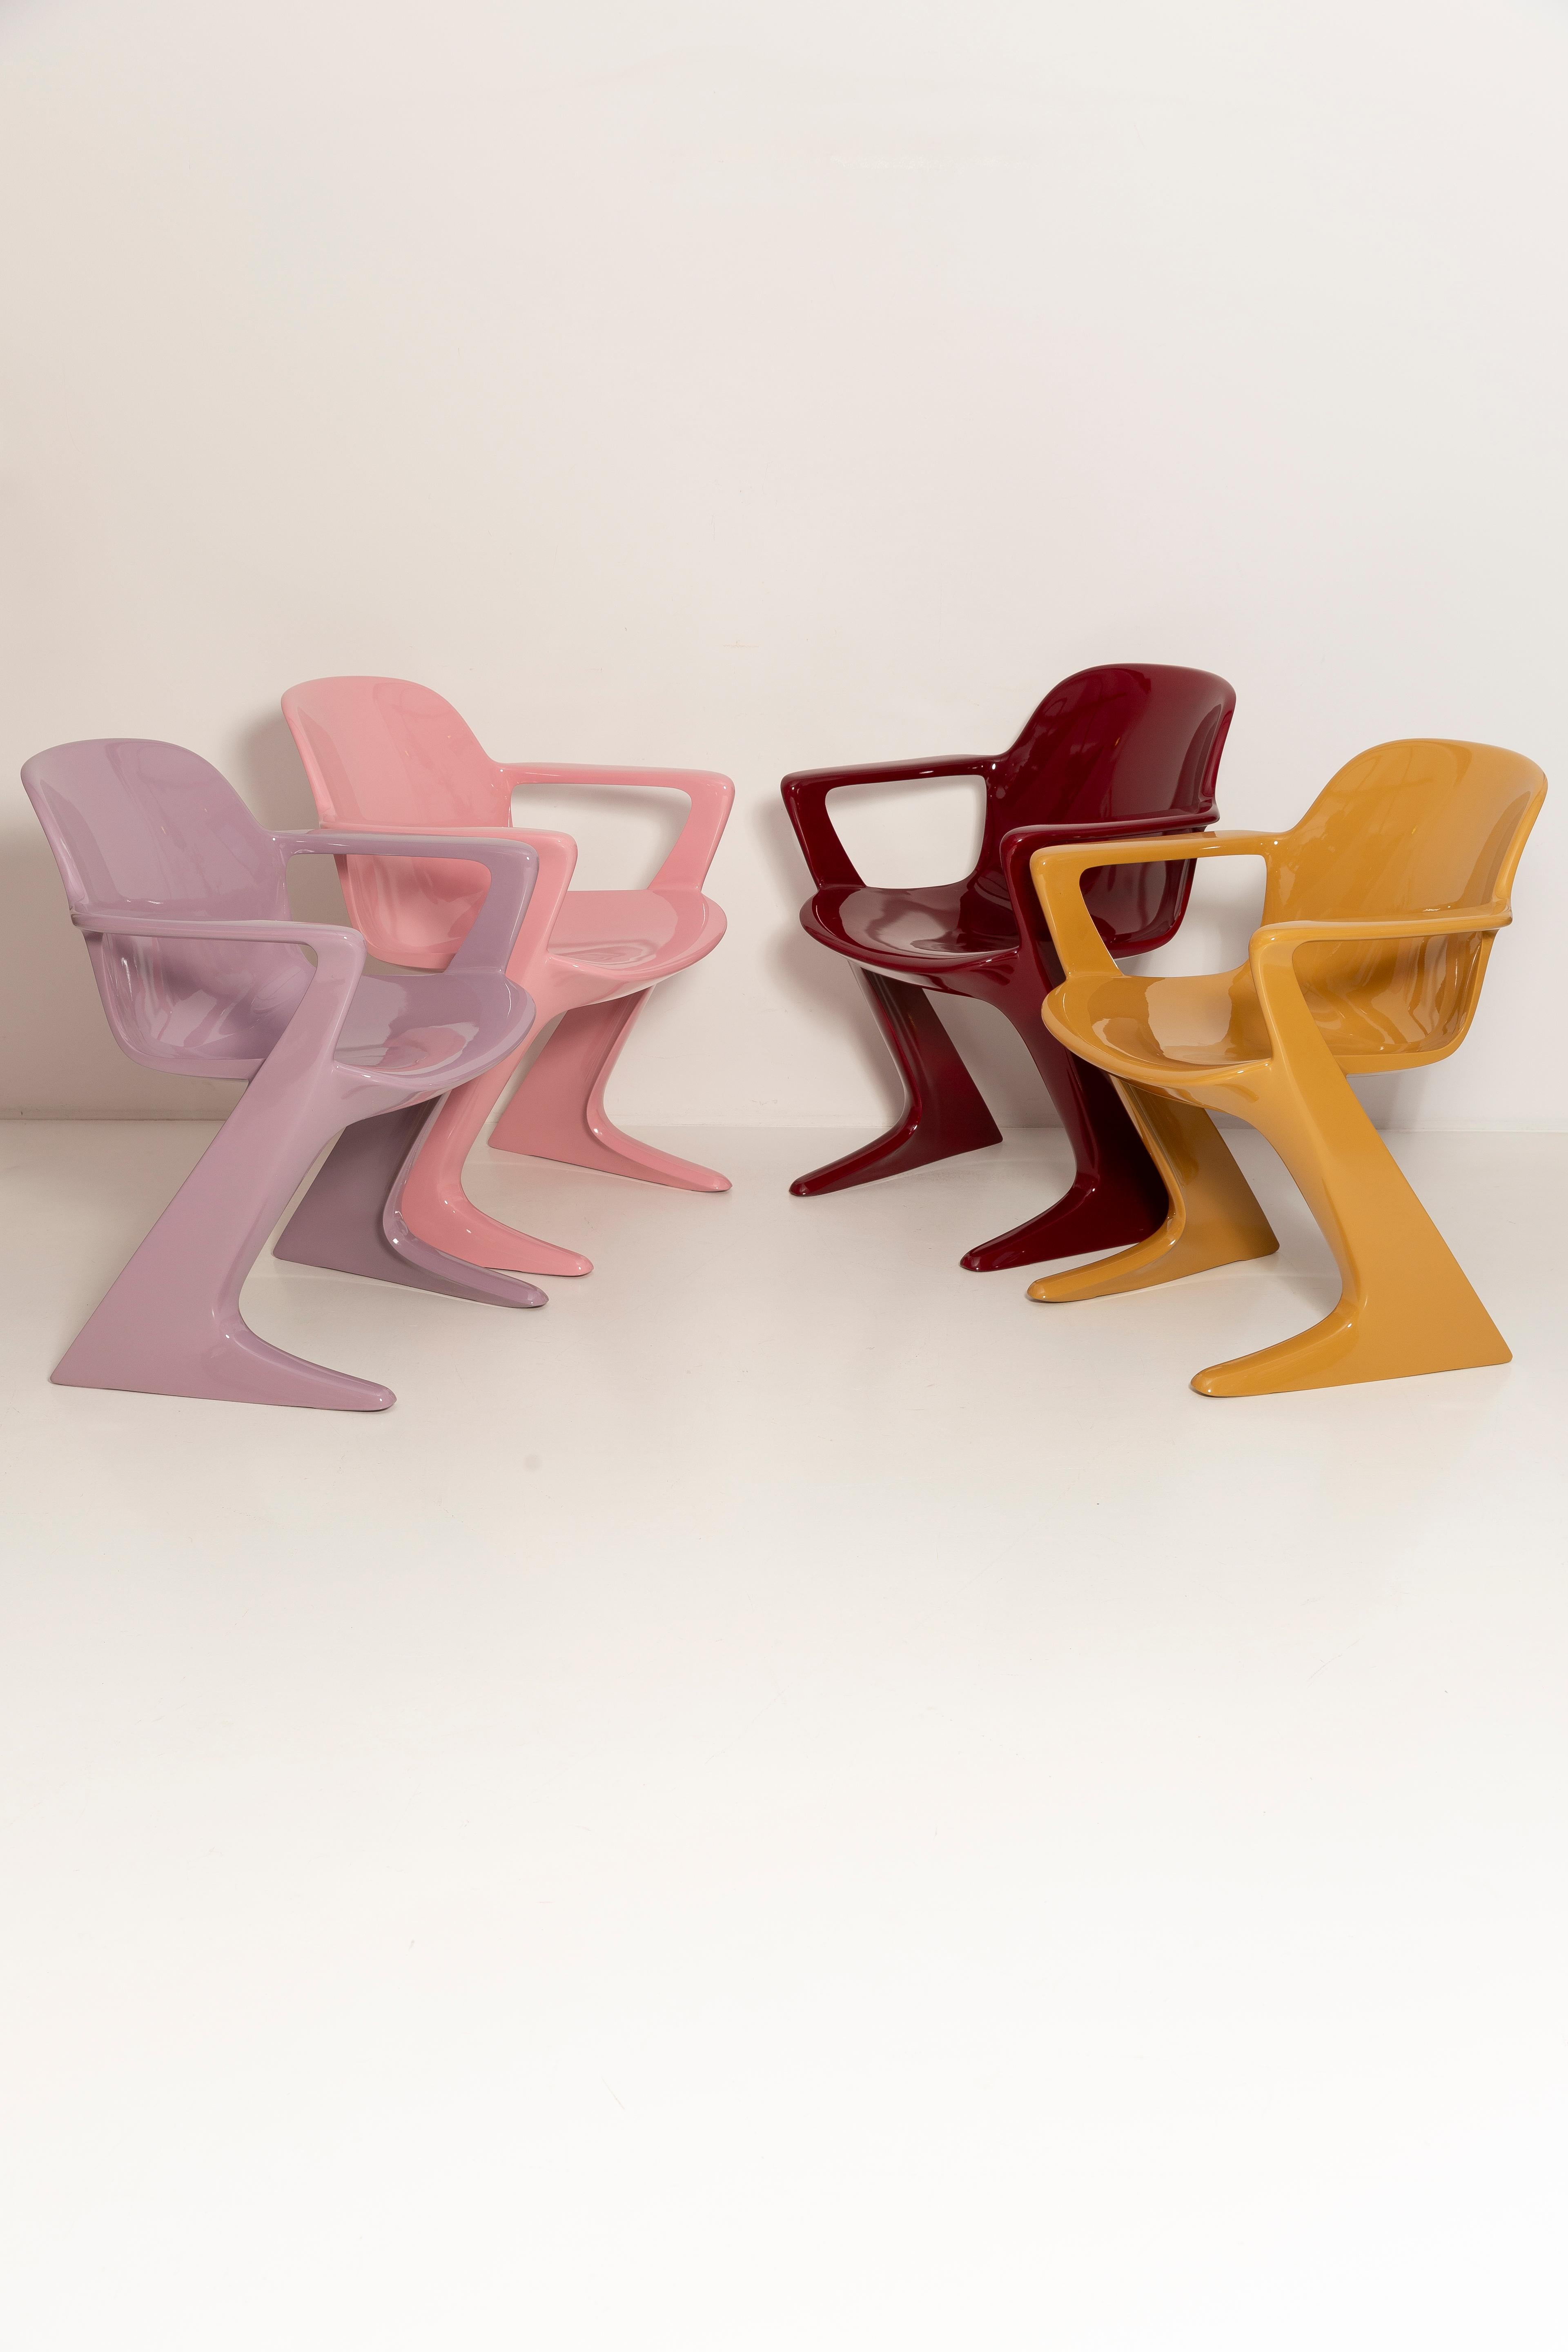 Set of Three Mid Century Kangaroo Chairs, Ernst Moeckl, Germany, 1968 For Sale 7